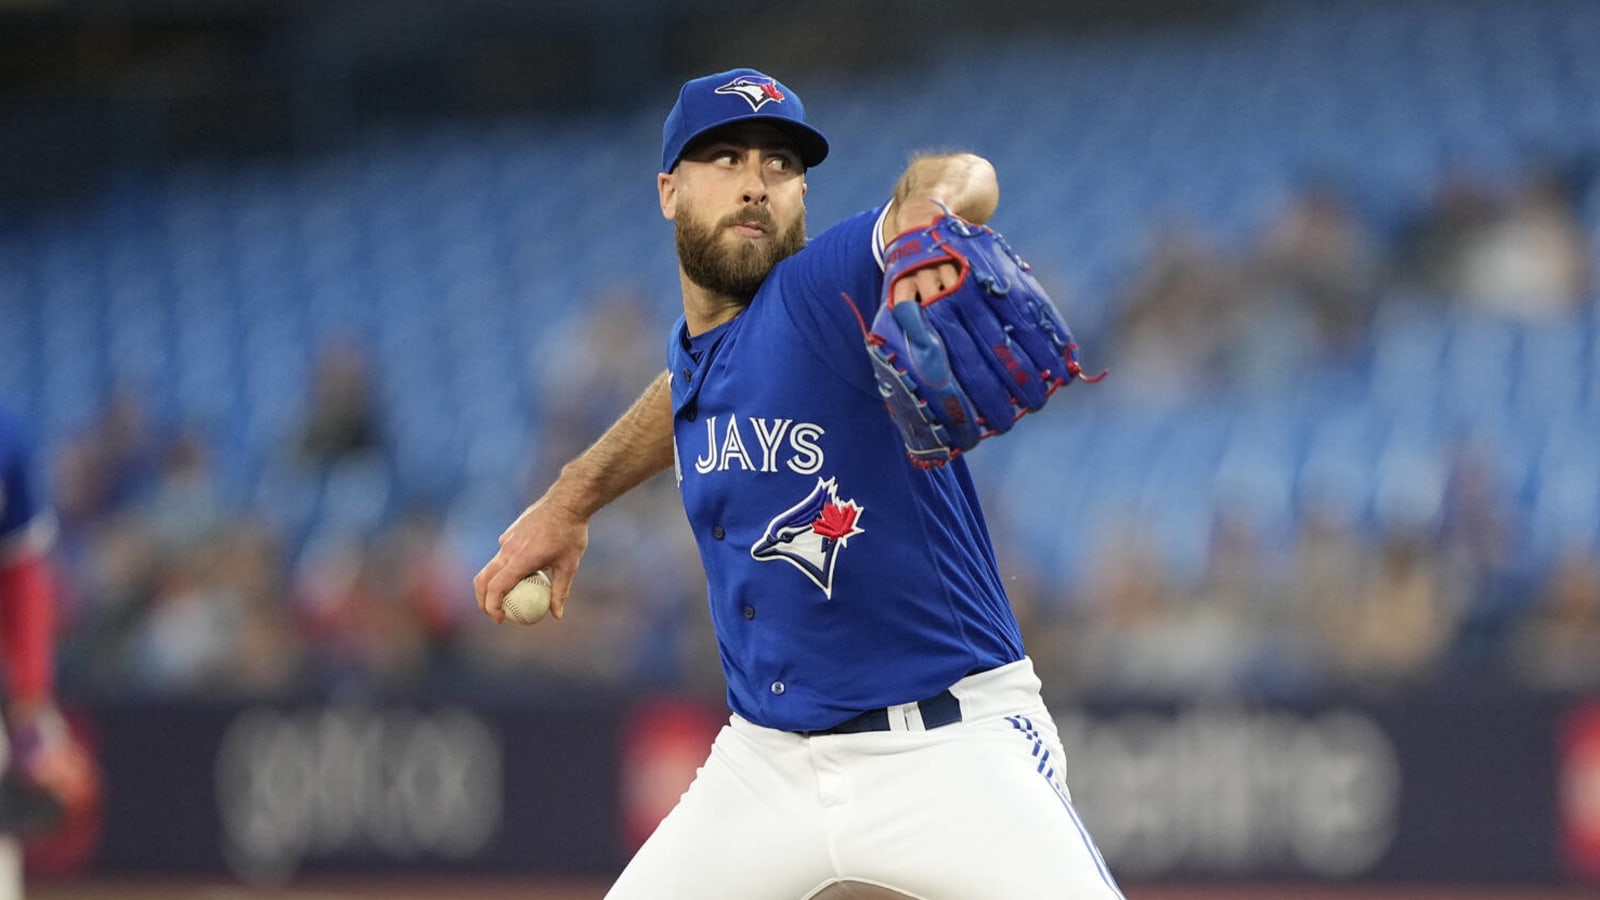 Blue Jays designate pitcher who shared anti-LGBTQ+ post for assignment